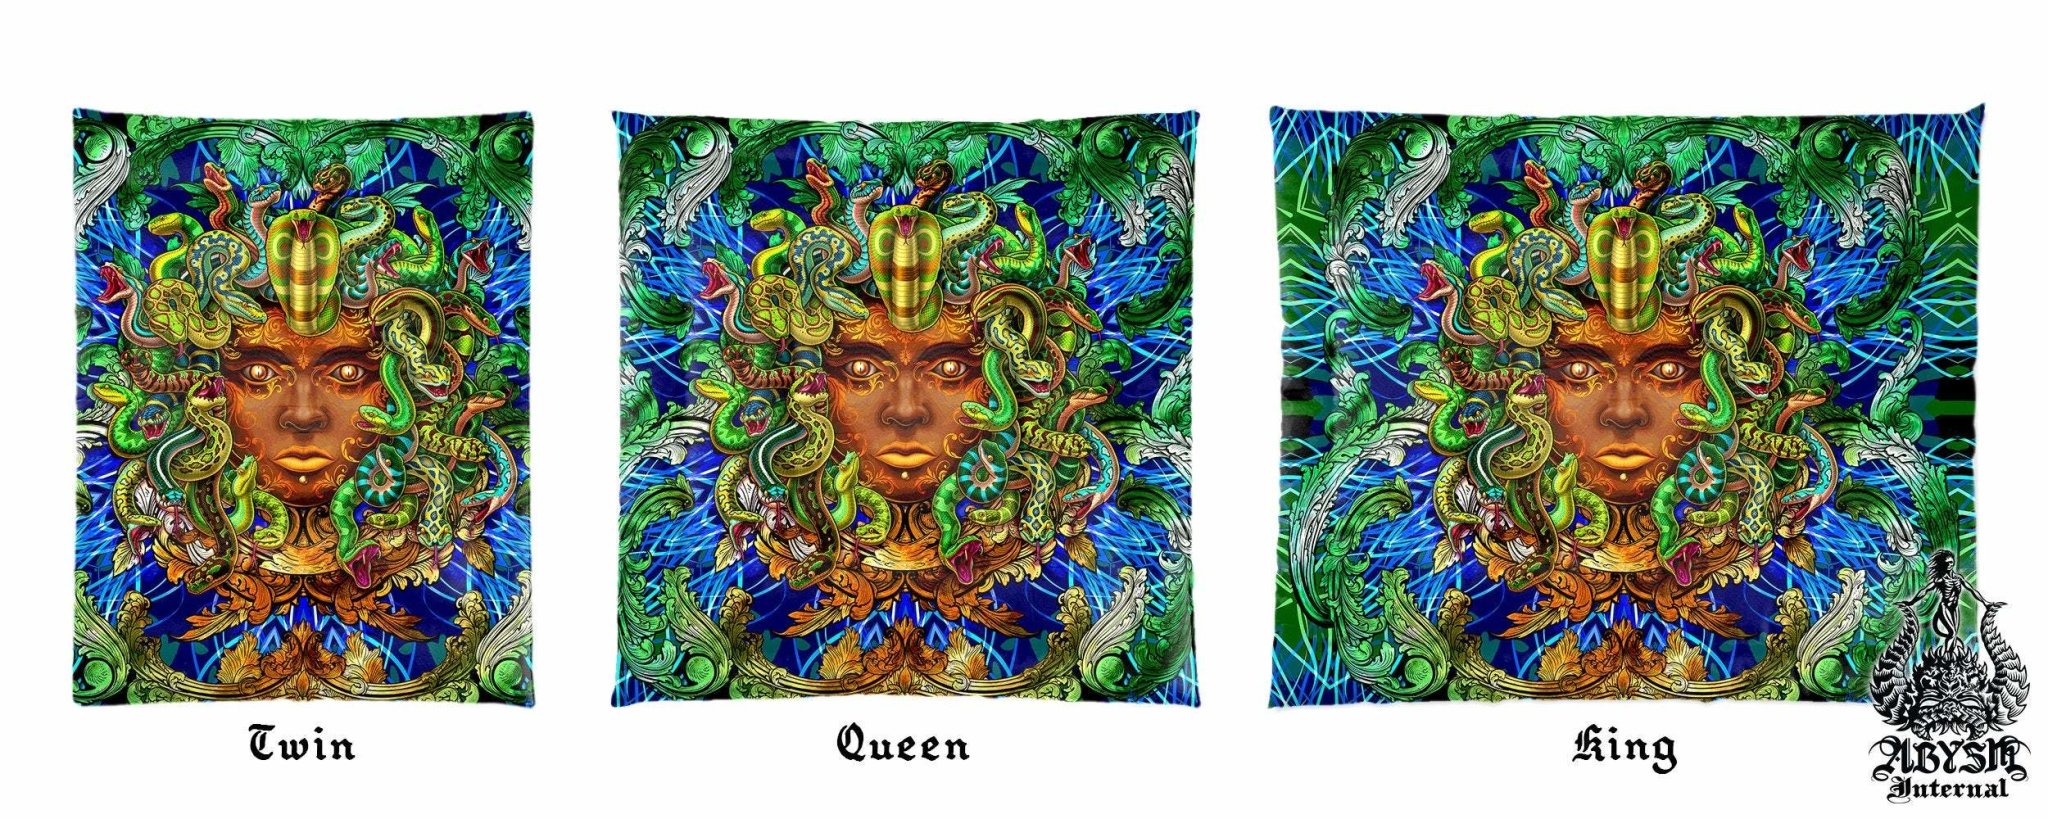 Medusa Bedding Set, Comforter and Duvet, Fantasy Indie Bed Cover and Bedroom Decor, King, Queen and Twin Size - Nature - Abysm Internal